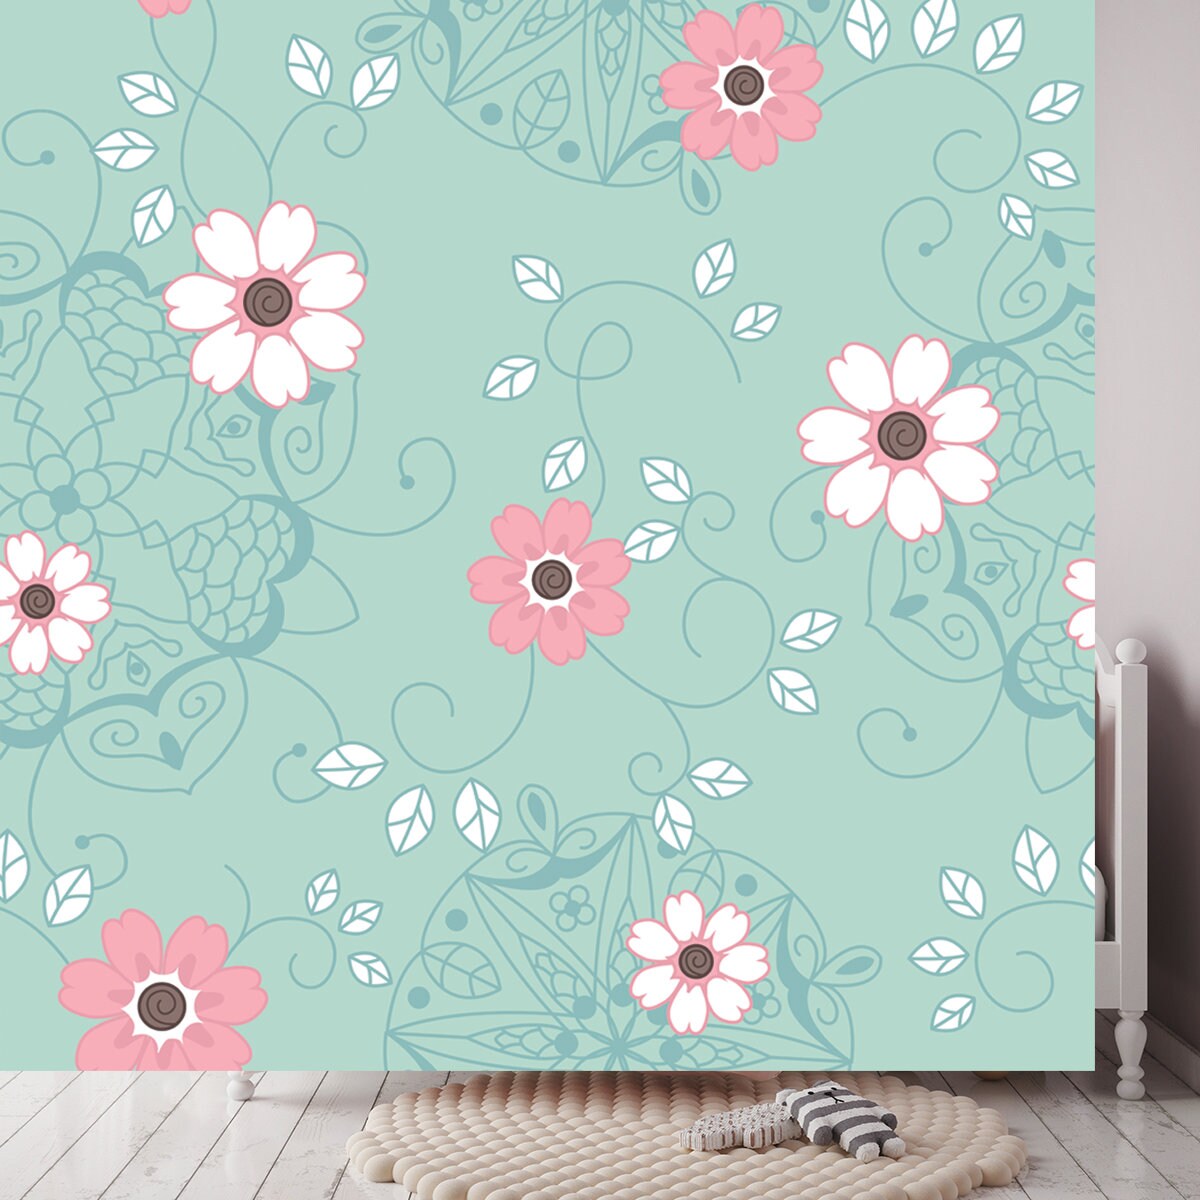 Pink and White Flowers and Little White Leaves and Vines with Beautiful Mandalas on a Turquoise Background Wallpaper Girls Bedroom Mural